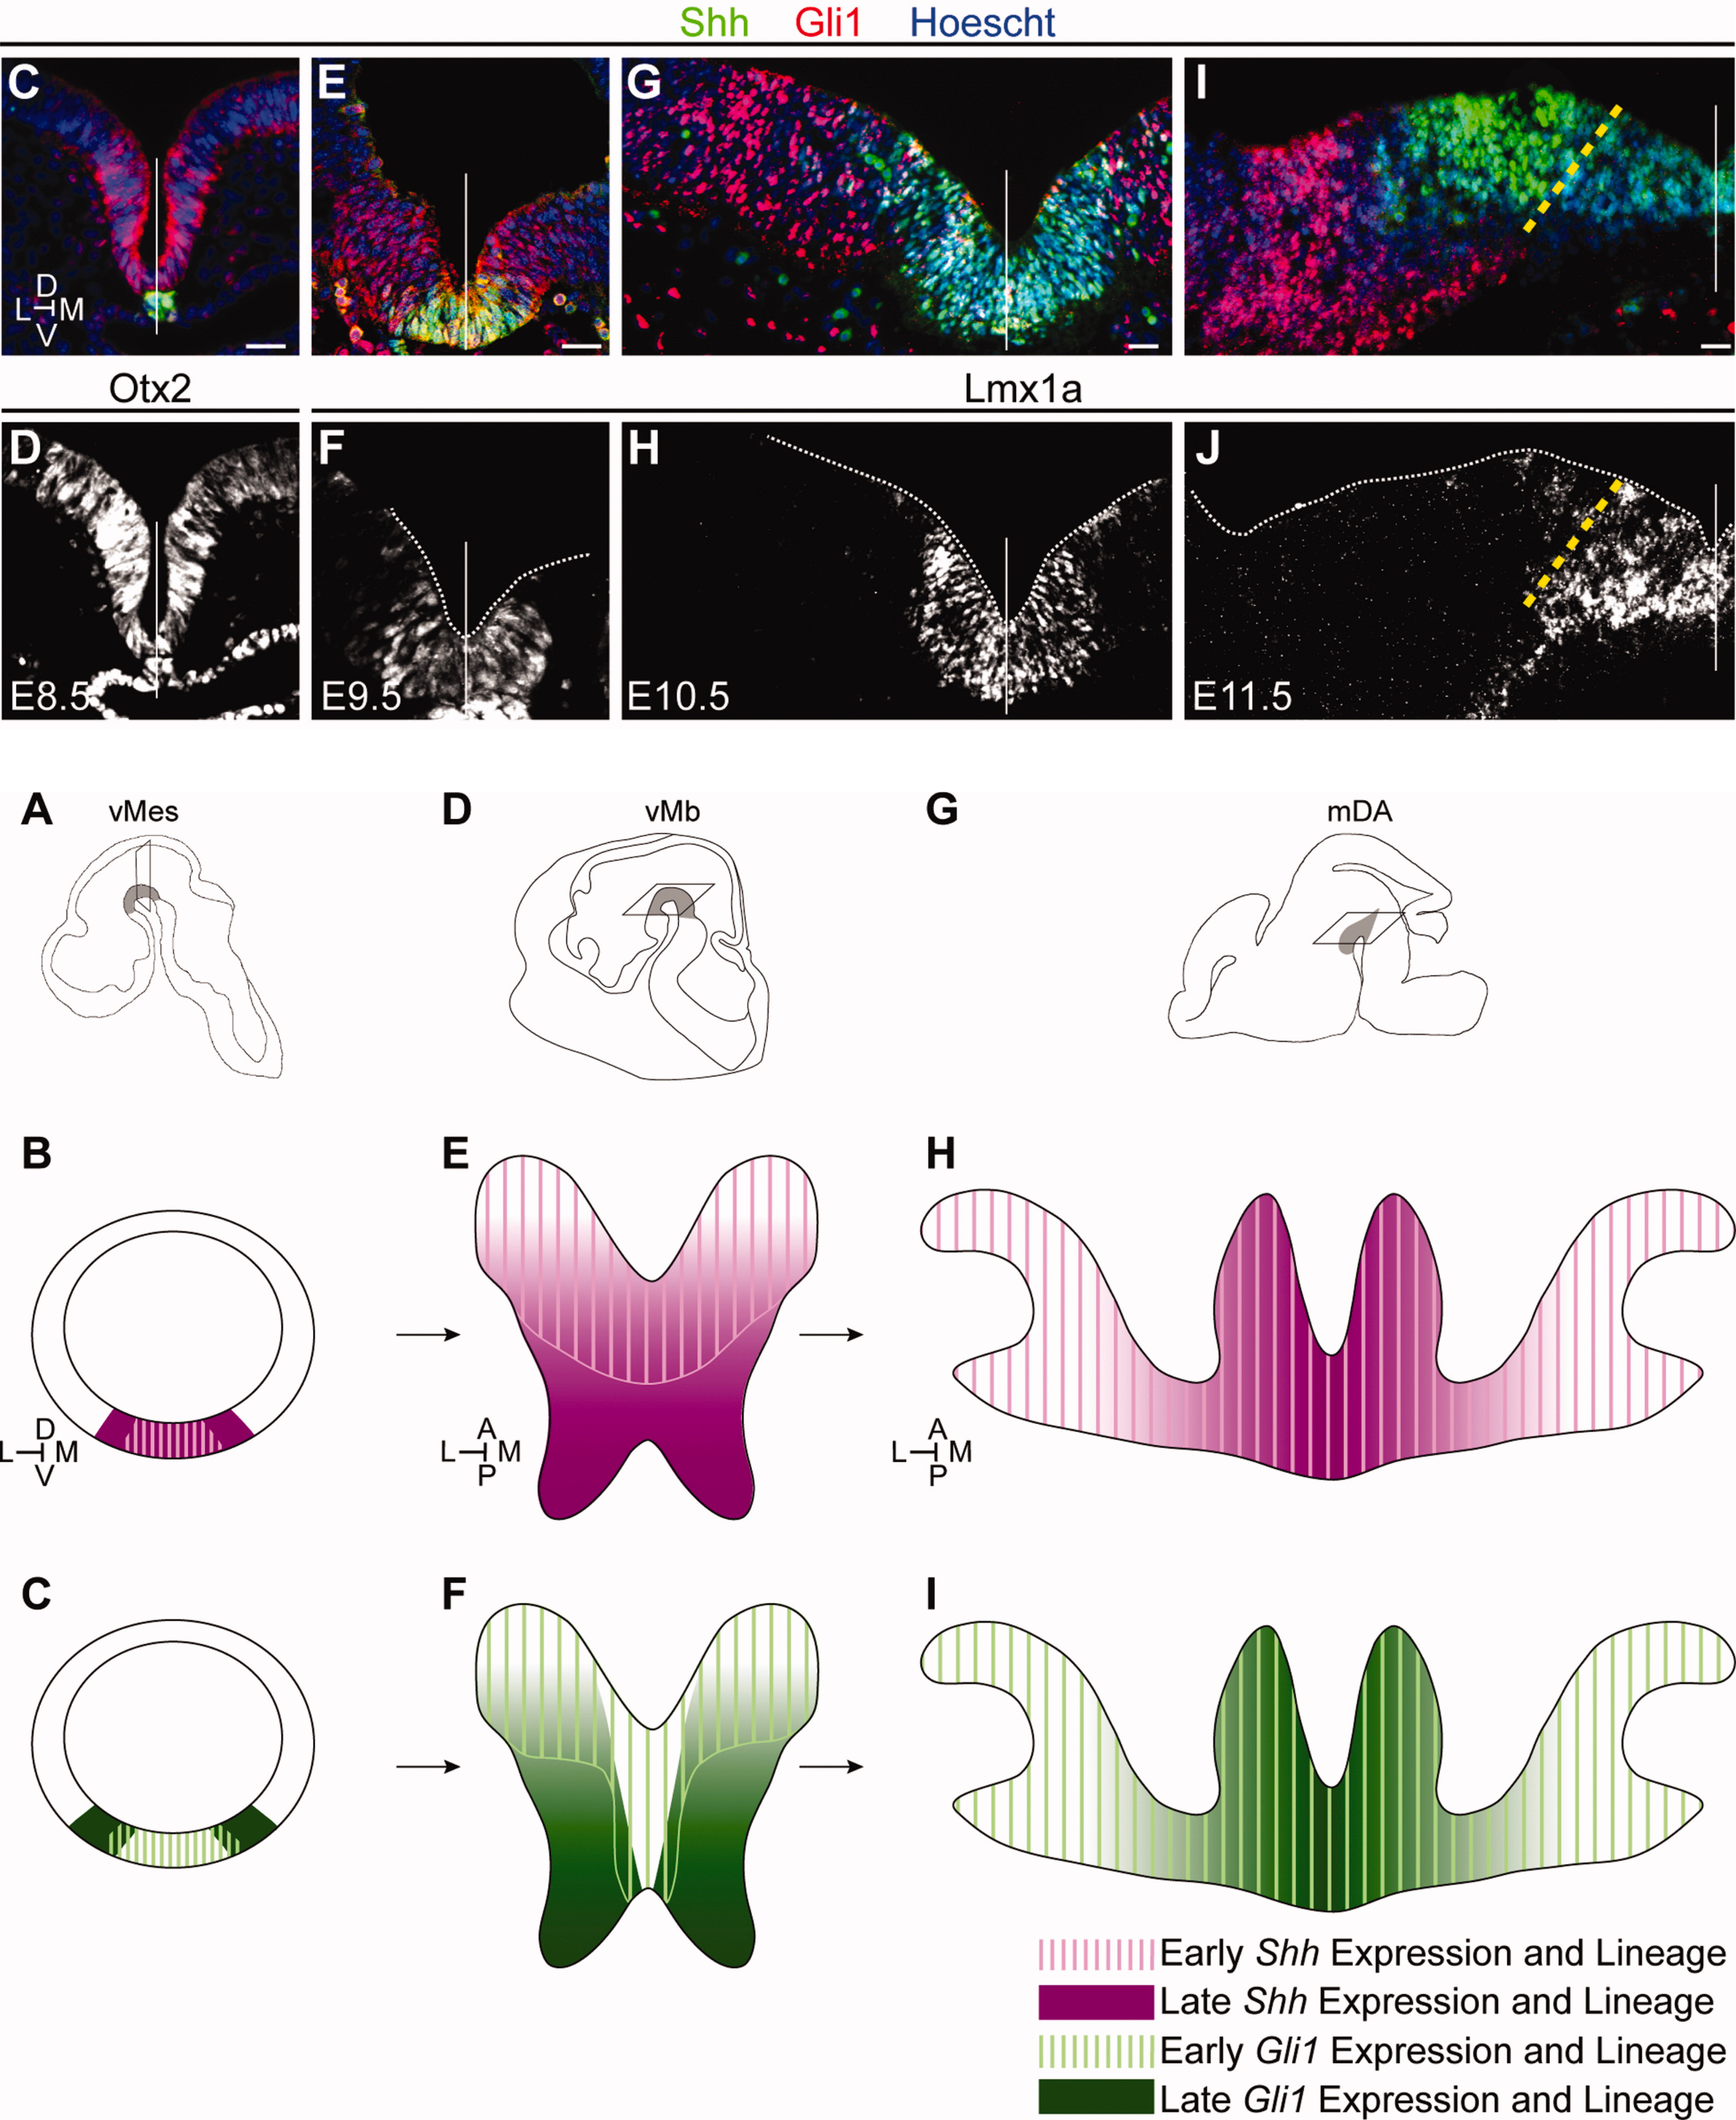 Hayes et al. 2011 Fate Mapping of Shh and Gli1 progenitors in the mouse ventral mesencephalon